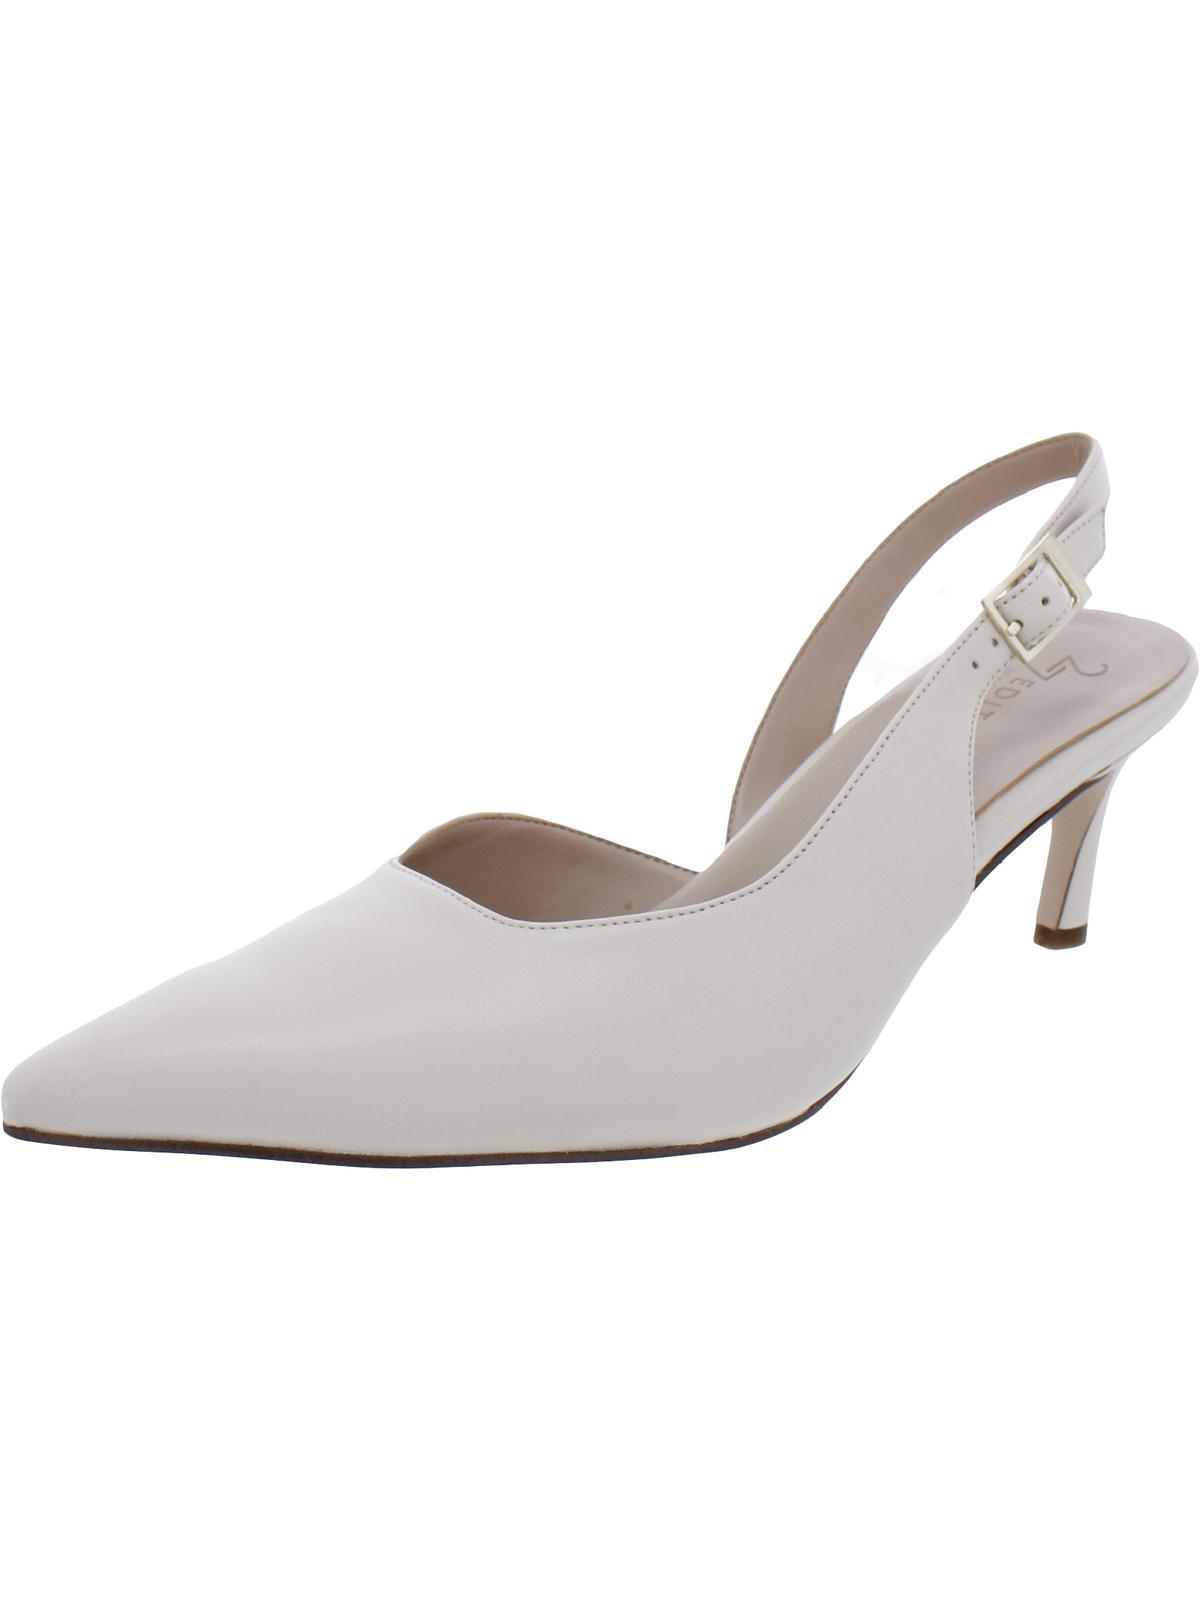 Naturalizer Felicia Leather Slingback Pumps in Natural | Lyst